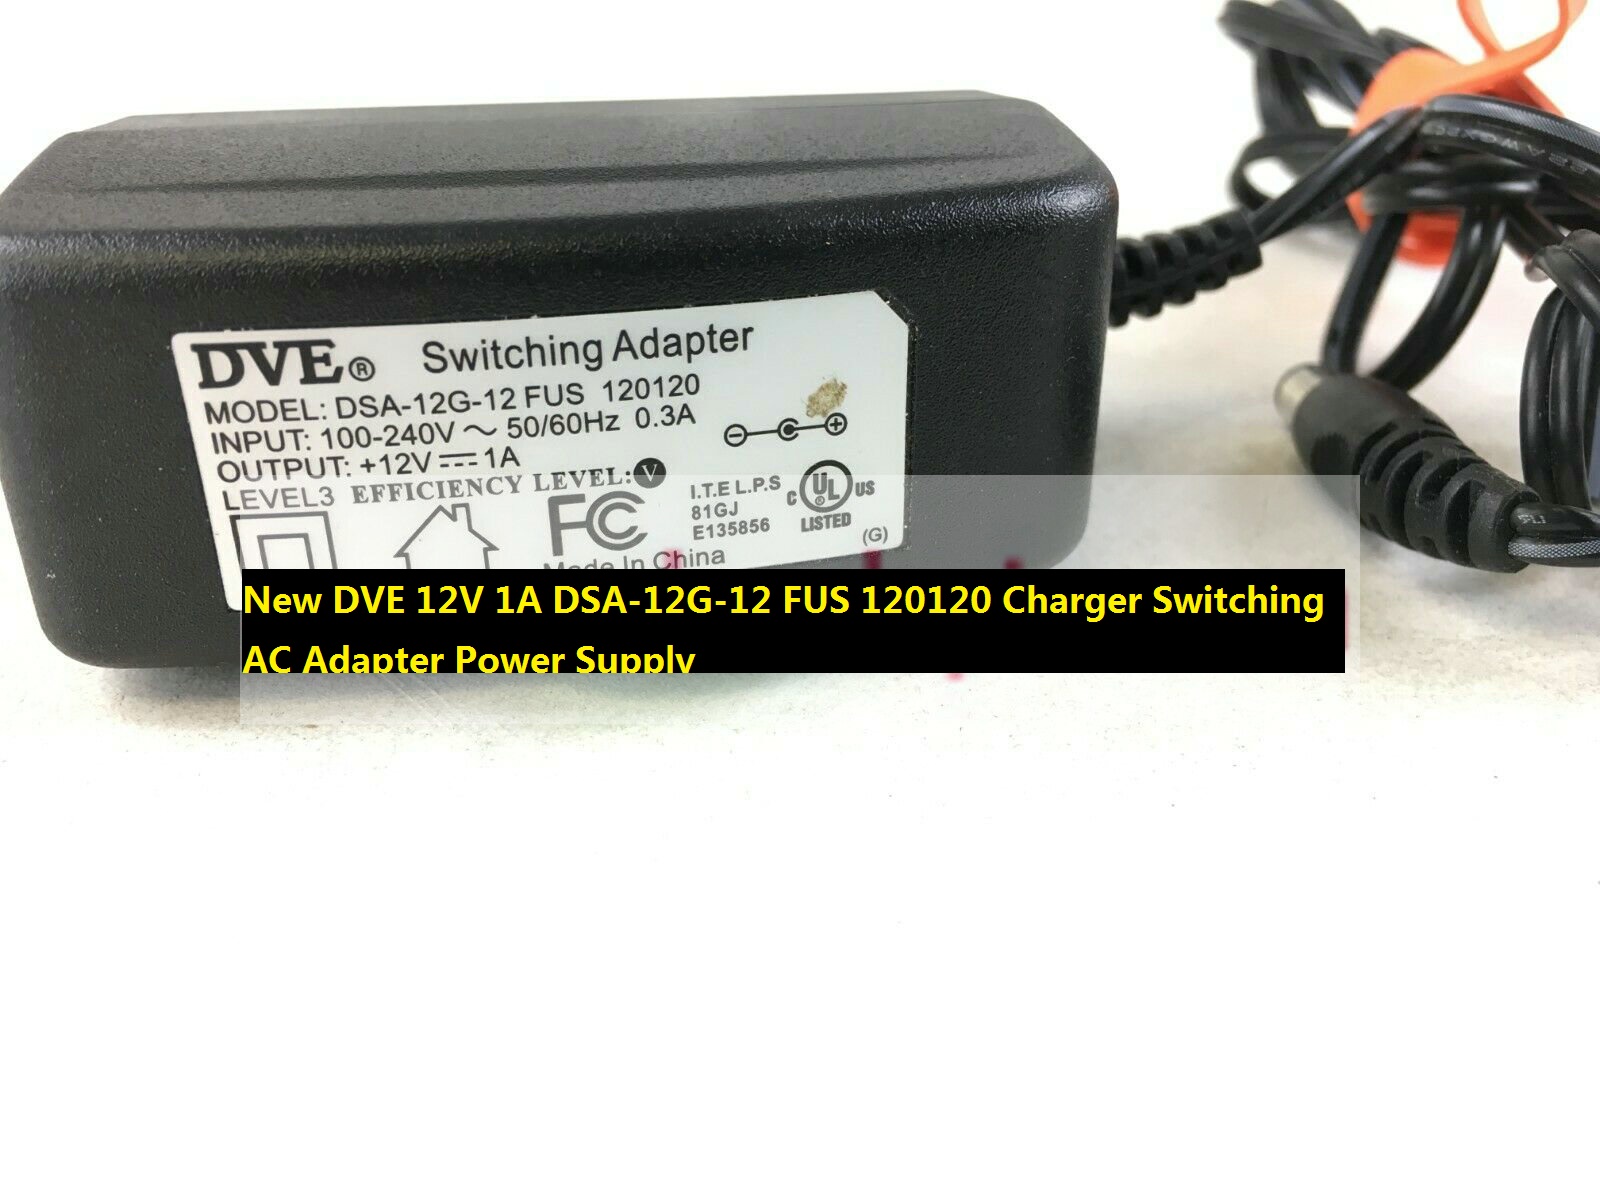 *Brand NEW* DVE 12V 1A AC Adapter DSA-12G-12 FUS 120120 Charger Switching Power Supply - Click Image to Close